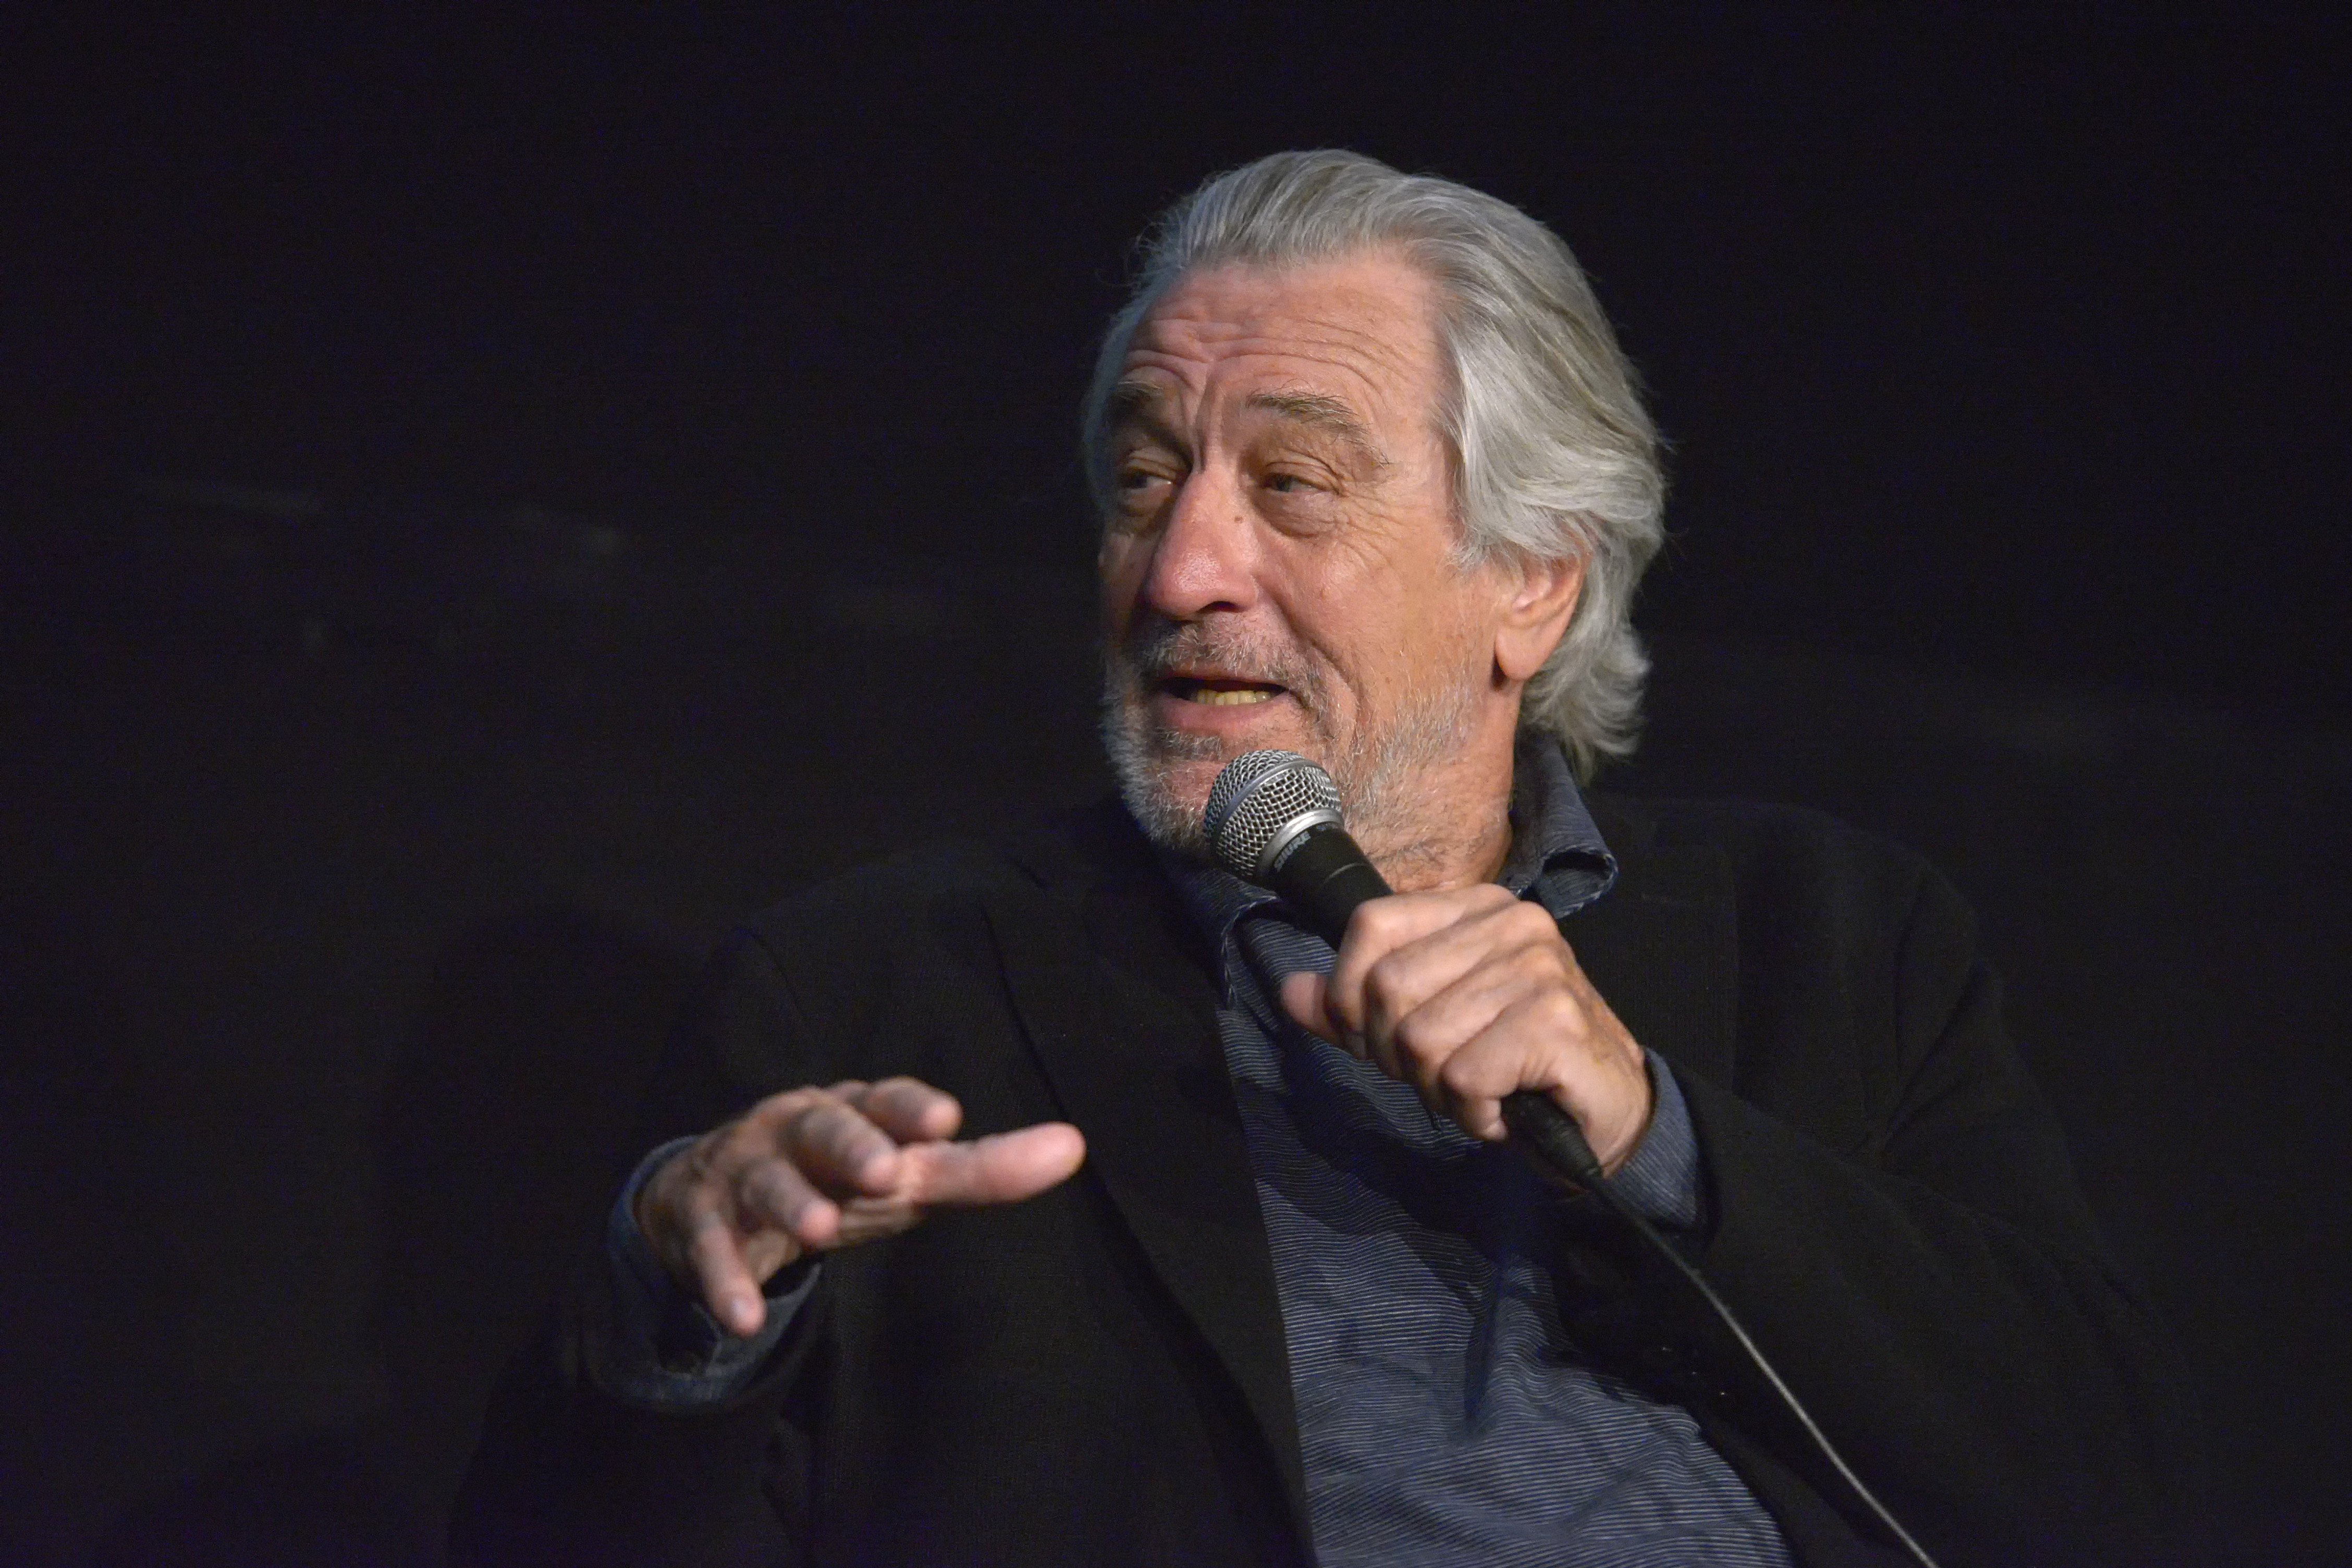 Robert De Niro at a Q&A session at a screening for Netflix's "The Irishman" on January 4, 2020 | Source: Getty Images